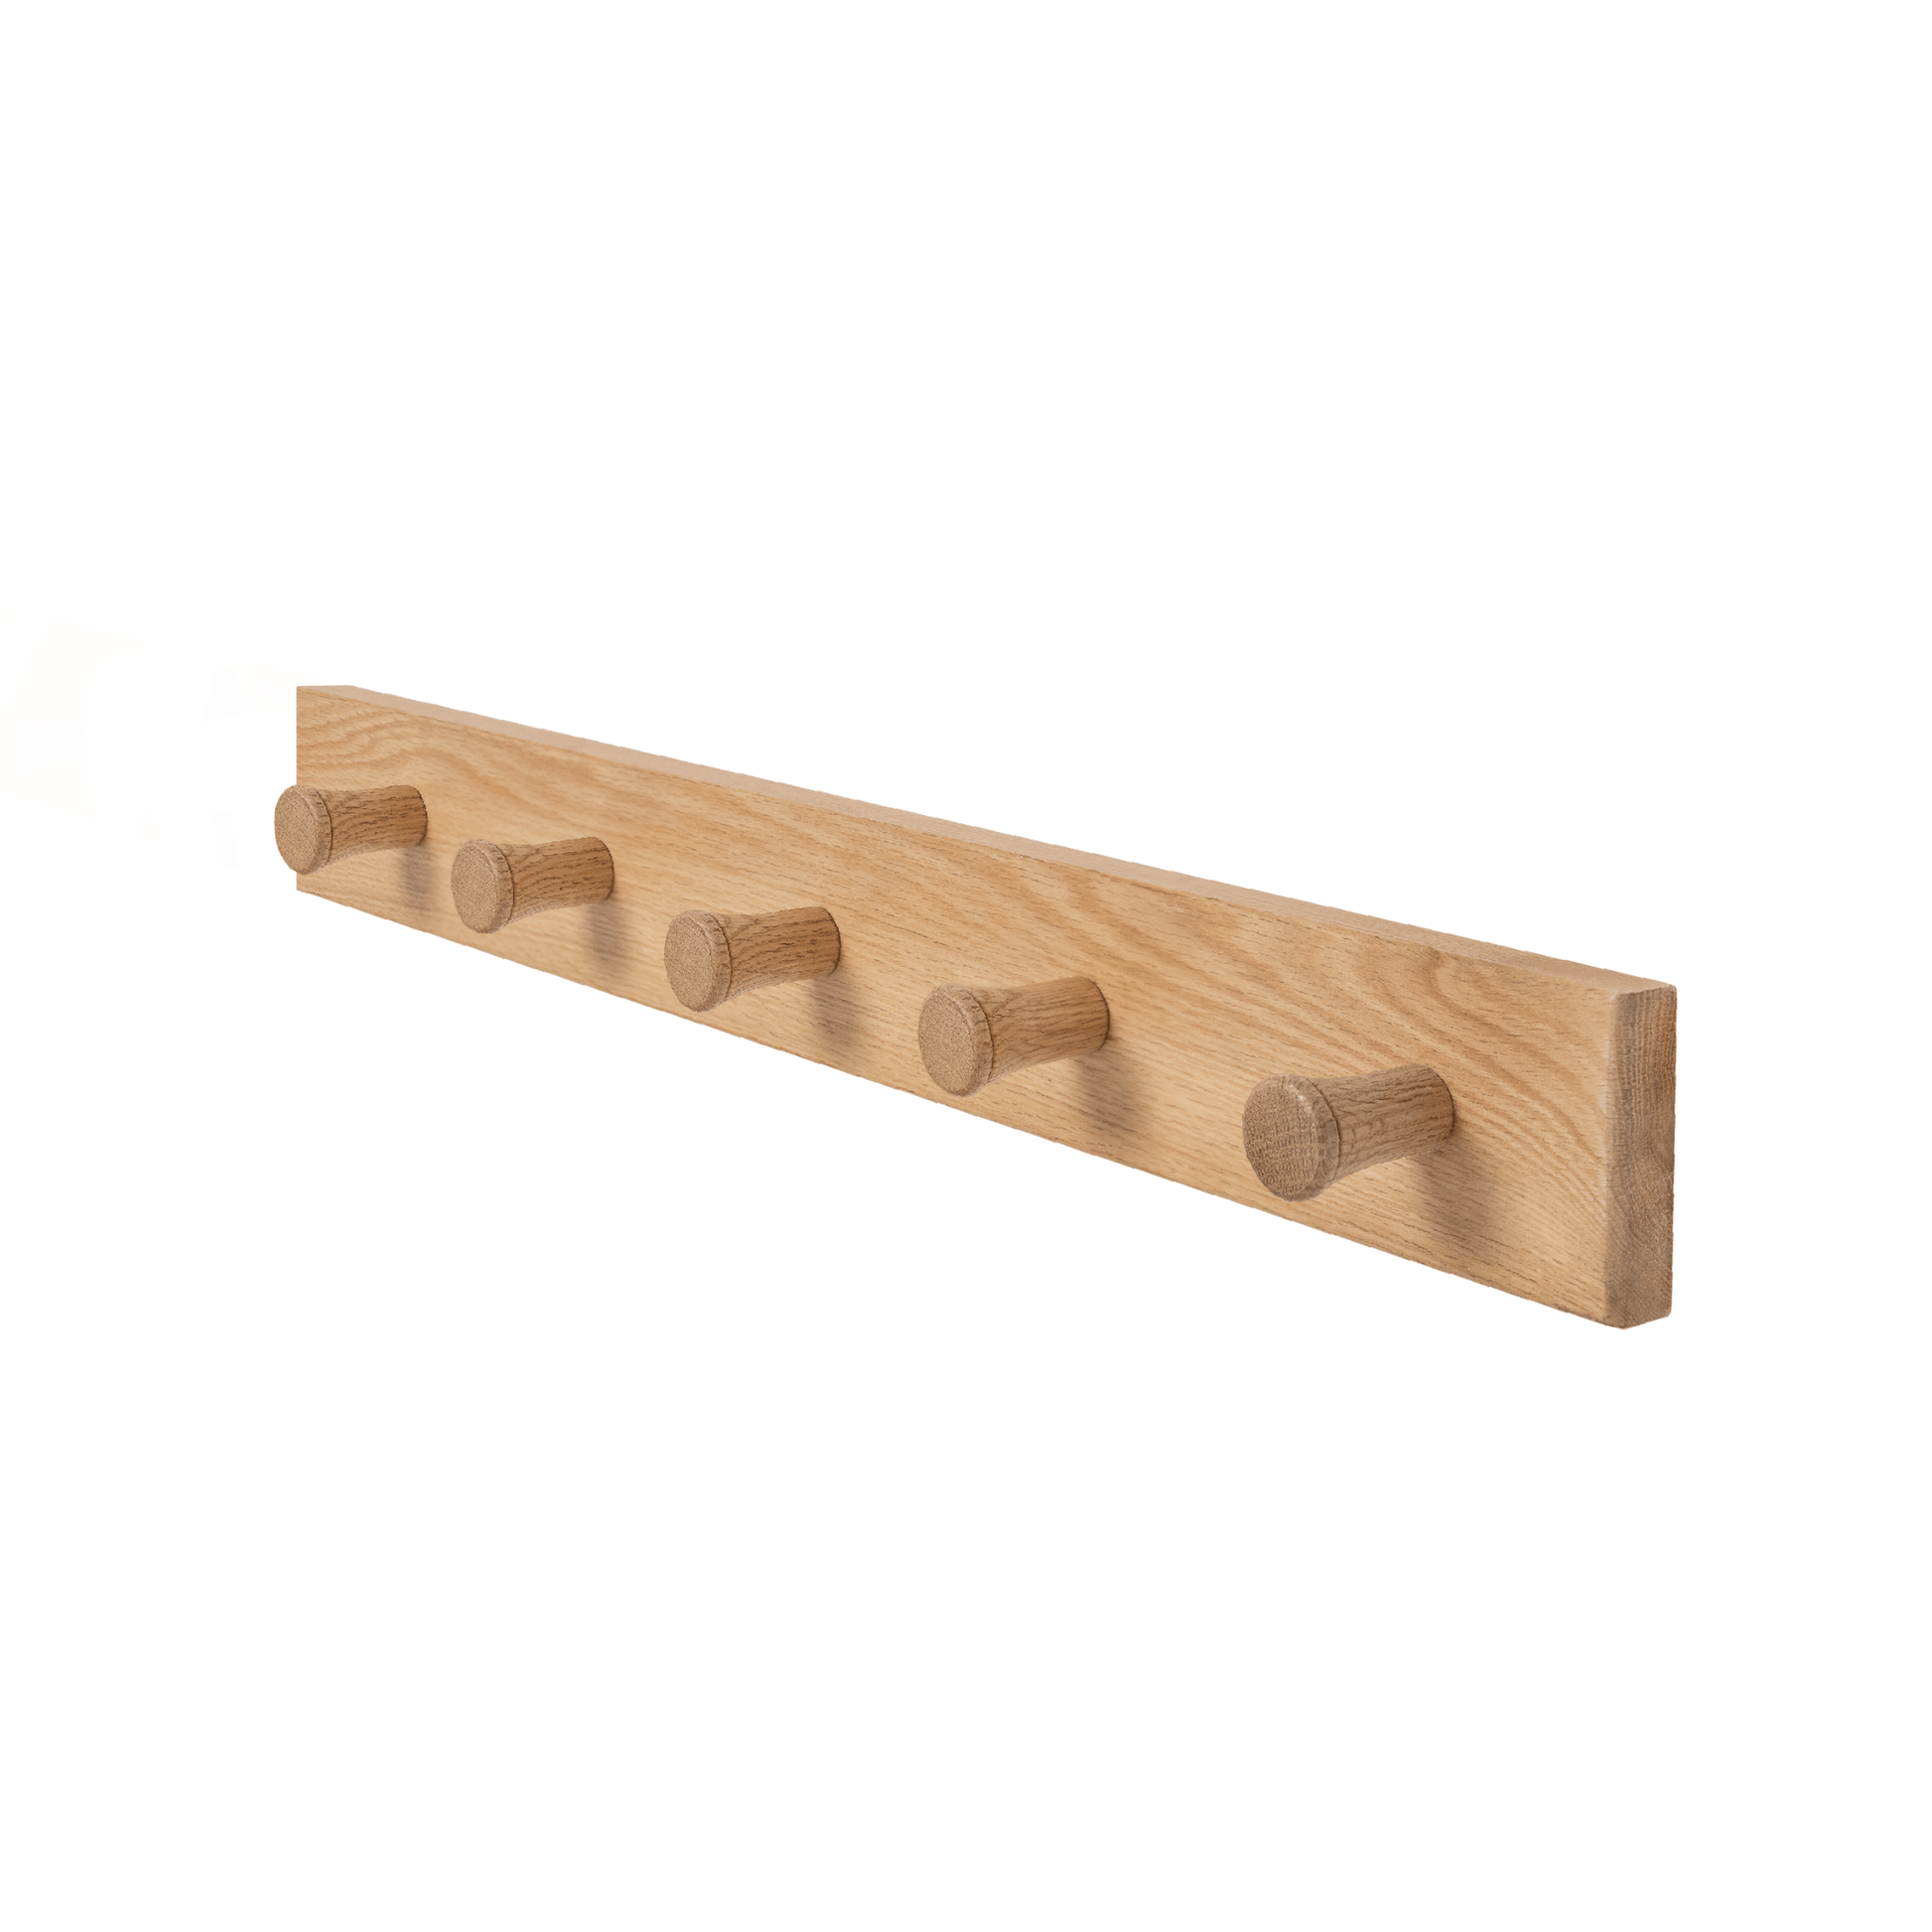 Wall Mounted Coat Hanger -Solid Oak - (5 Extra Thick Non Slip Pegs 108cm Long X 8.5cm Wide) - Hangersforless